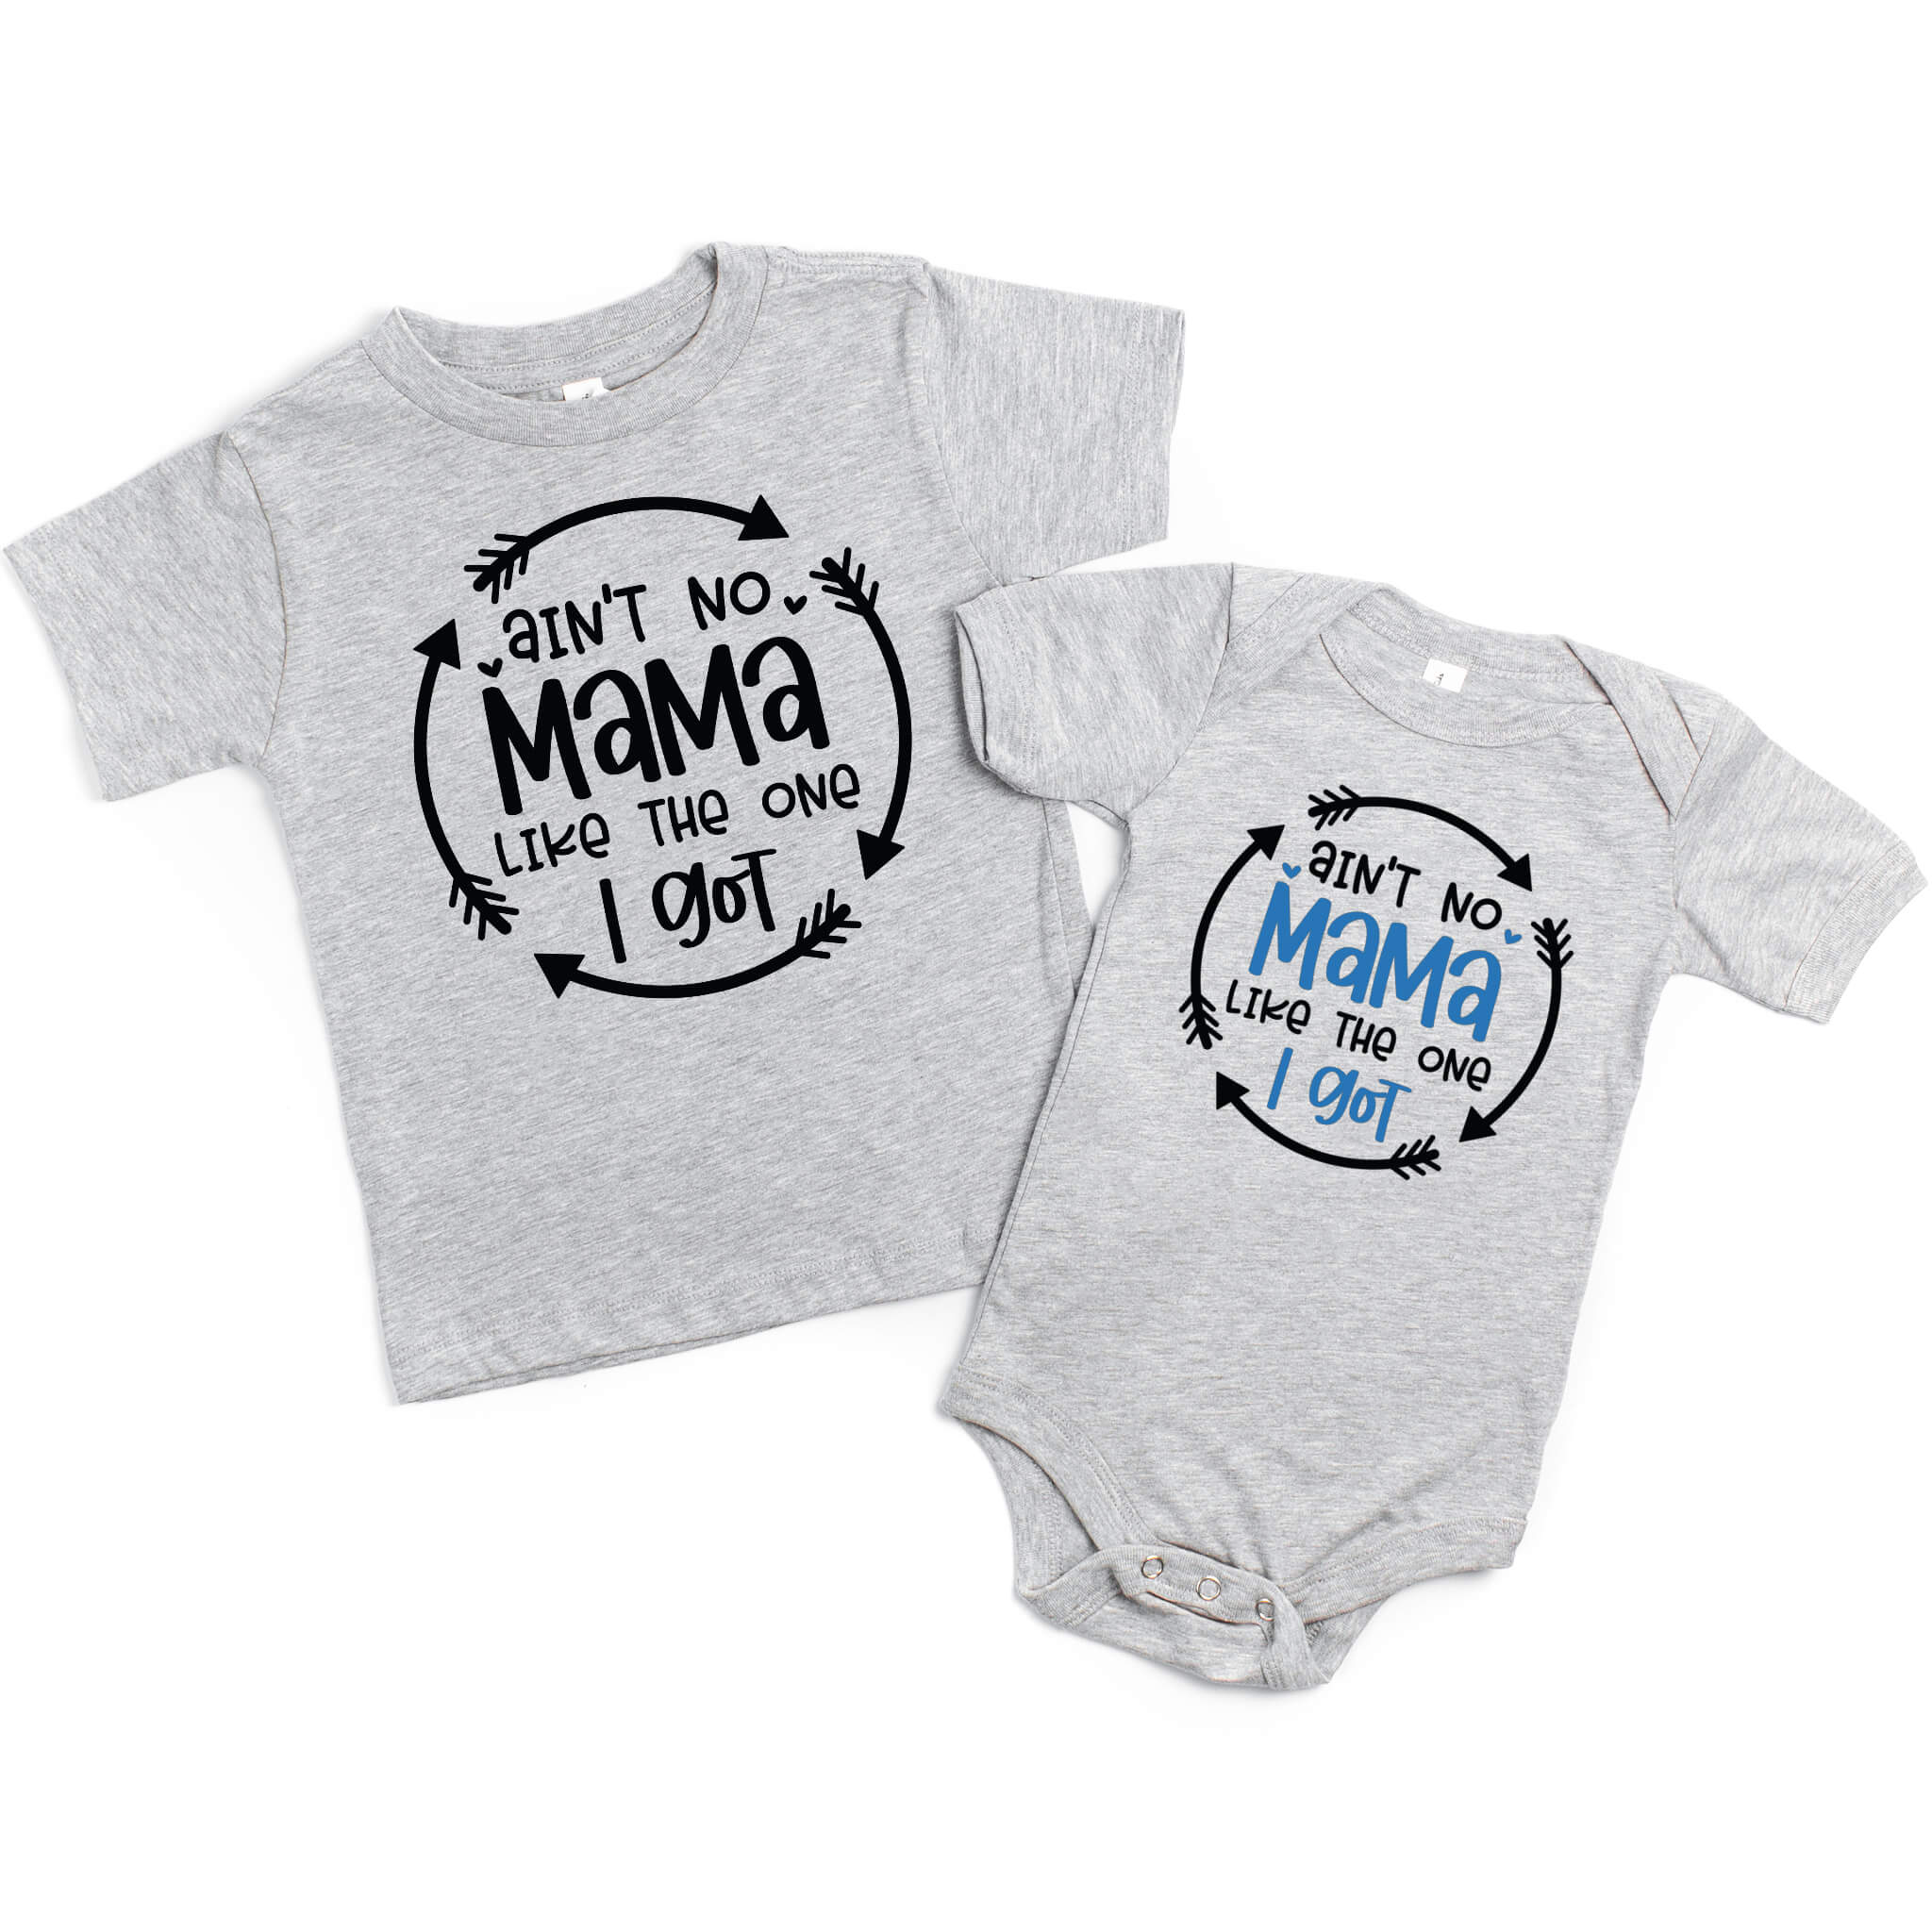 Mom, Mama, Mommy, Ain't No Mama Like The One I Got, Baby Onesie, Infant, Toddler, Youth, Boy's, Girl's T-Shirt, Birthday, Christmas, Mother's Day Gift